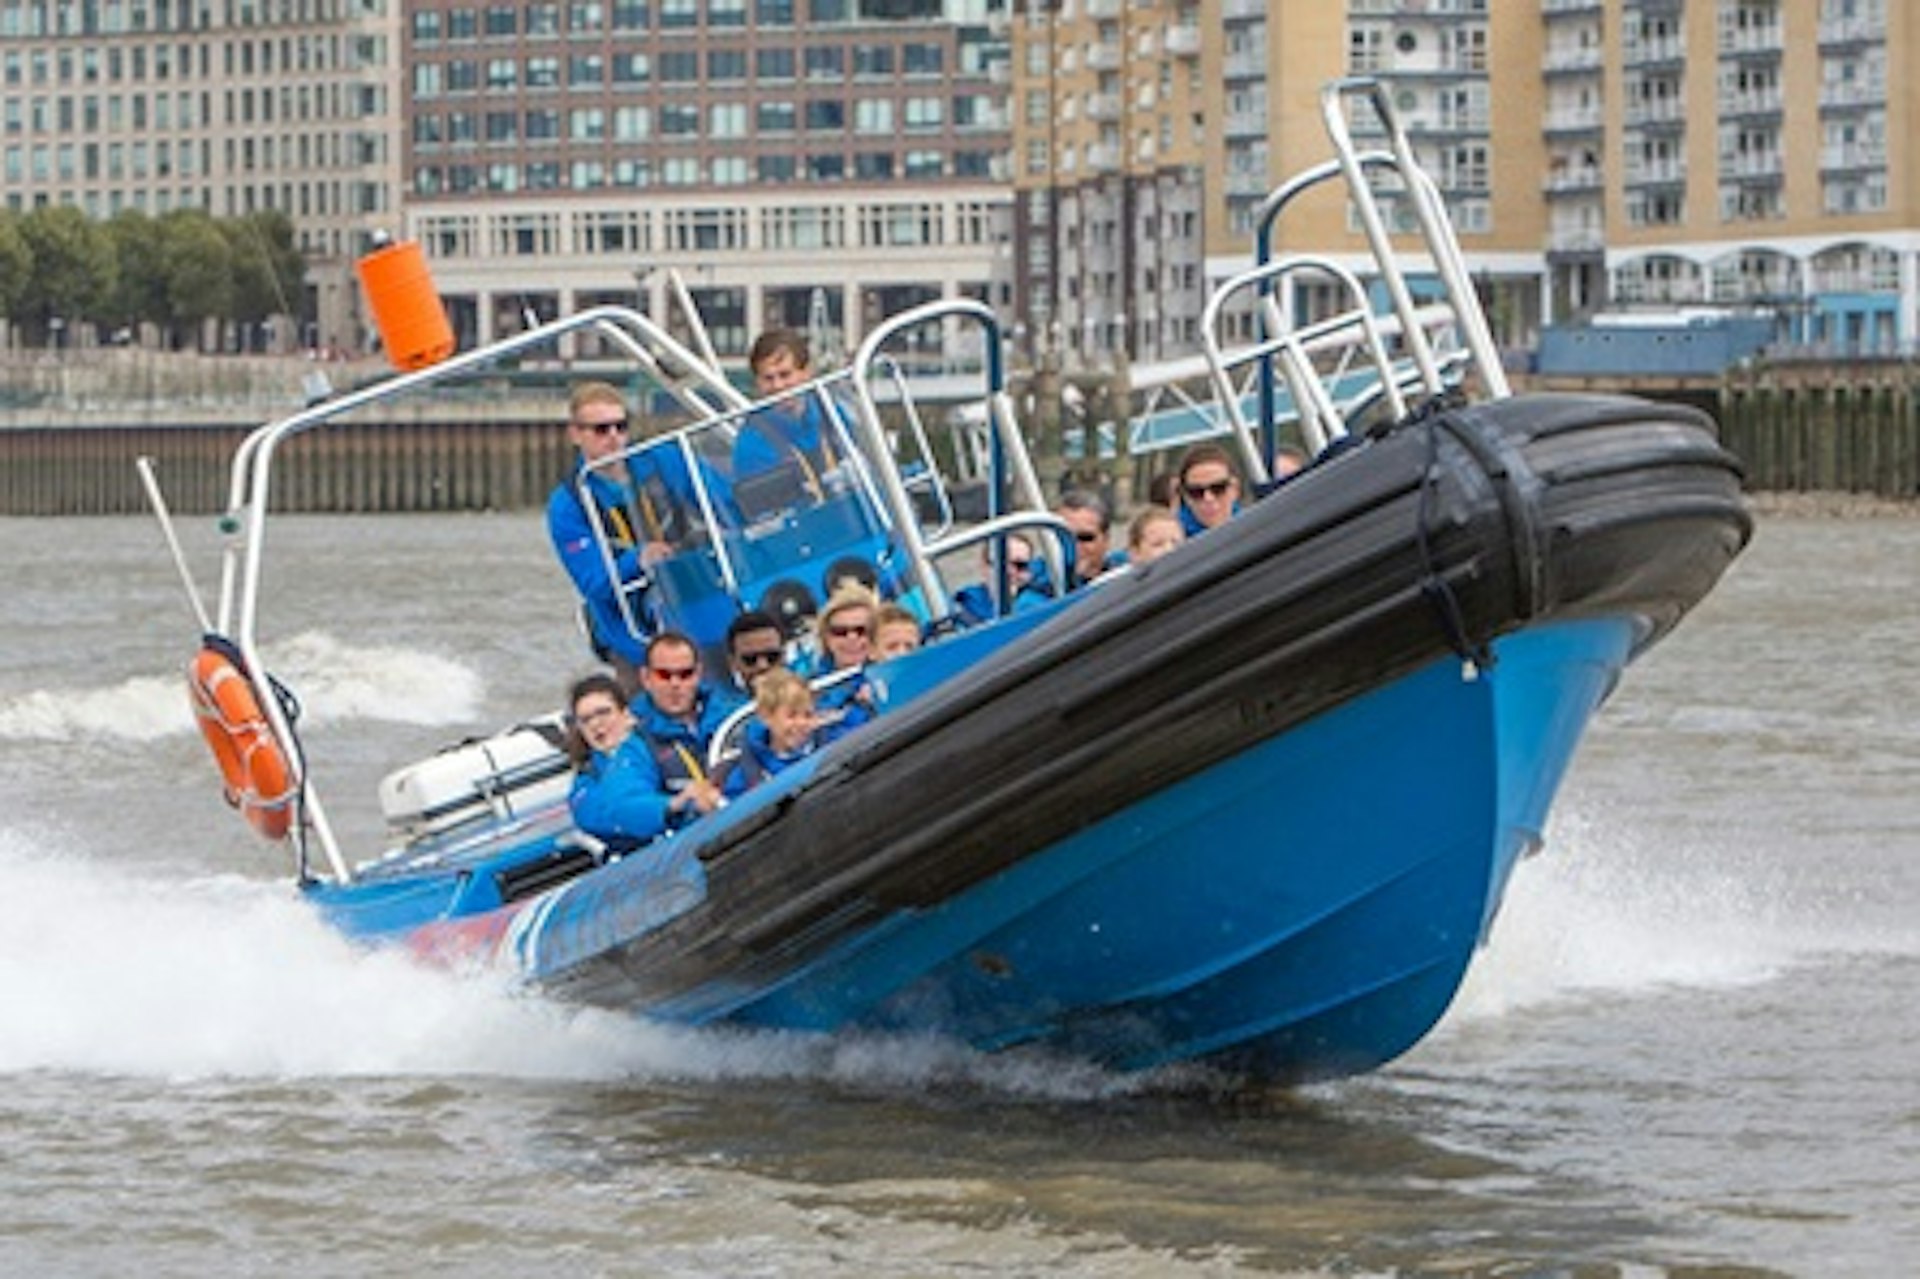 Thames Jet Boat Rush and Three Course Meal for Two at Marco Pierre White's London Steakhouse Co 3